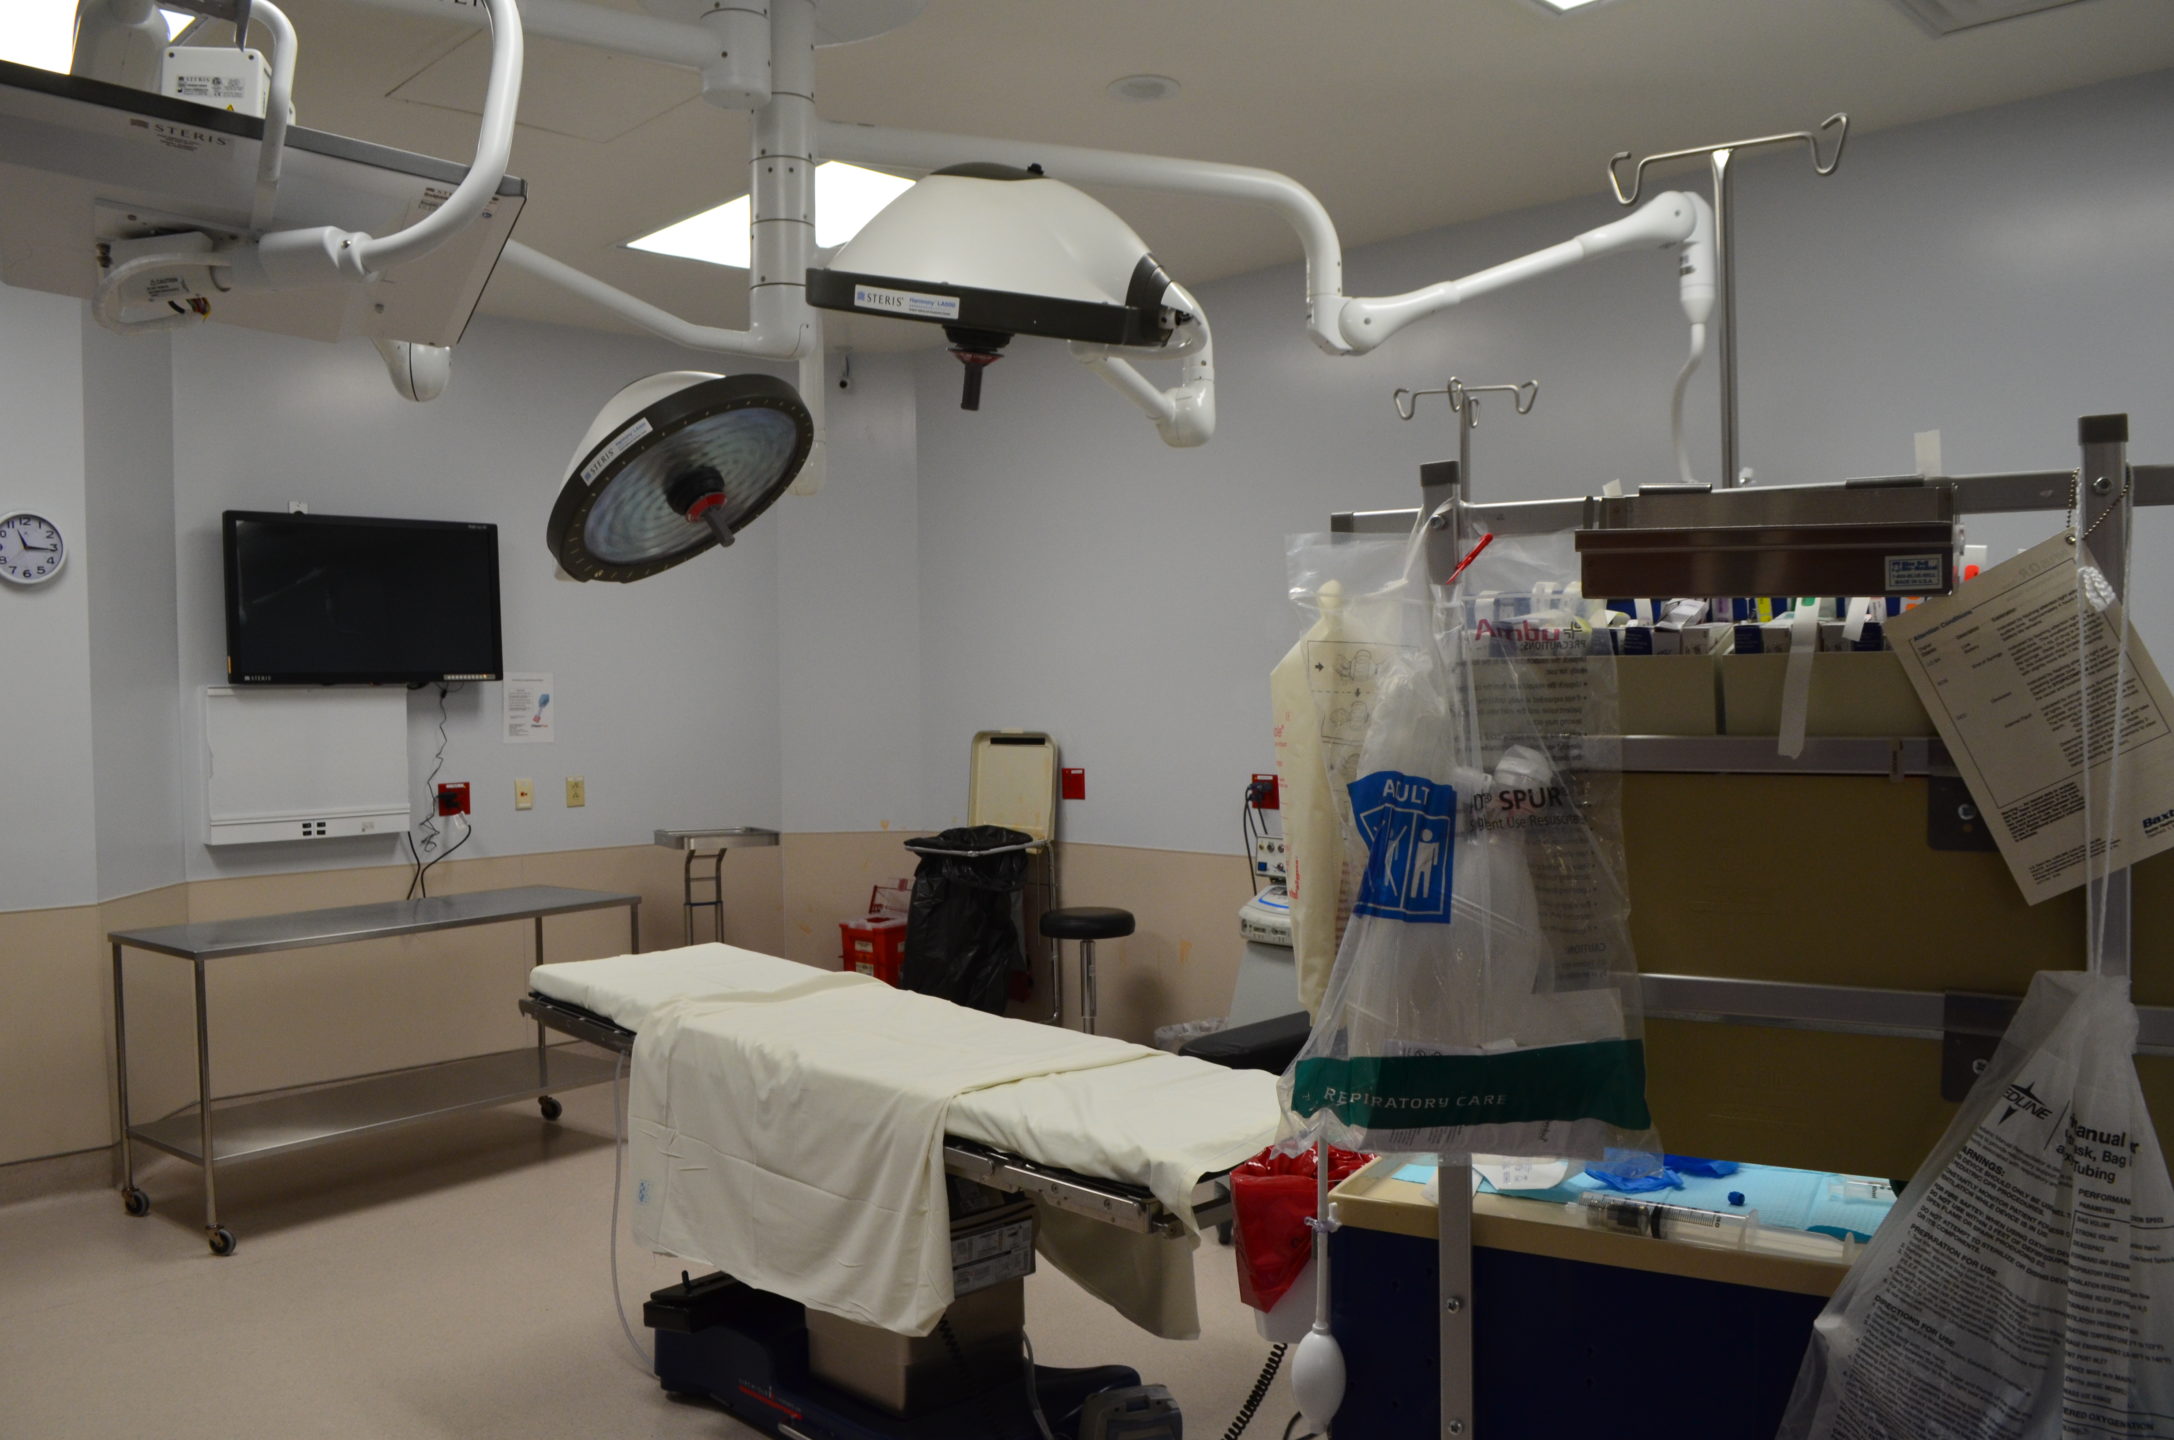  A view of a prepped operating room shows surgical equipment and instruments. 